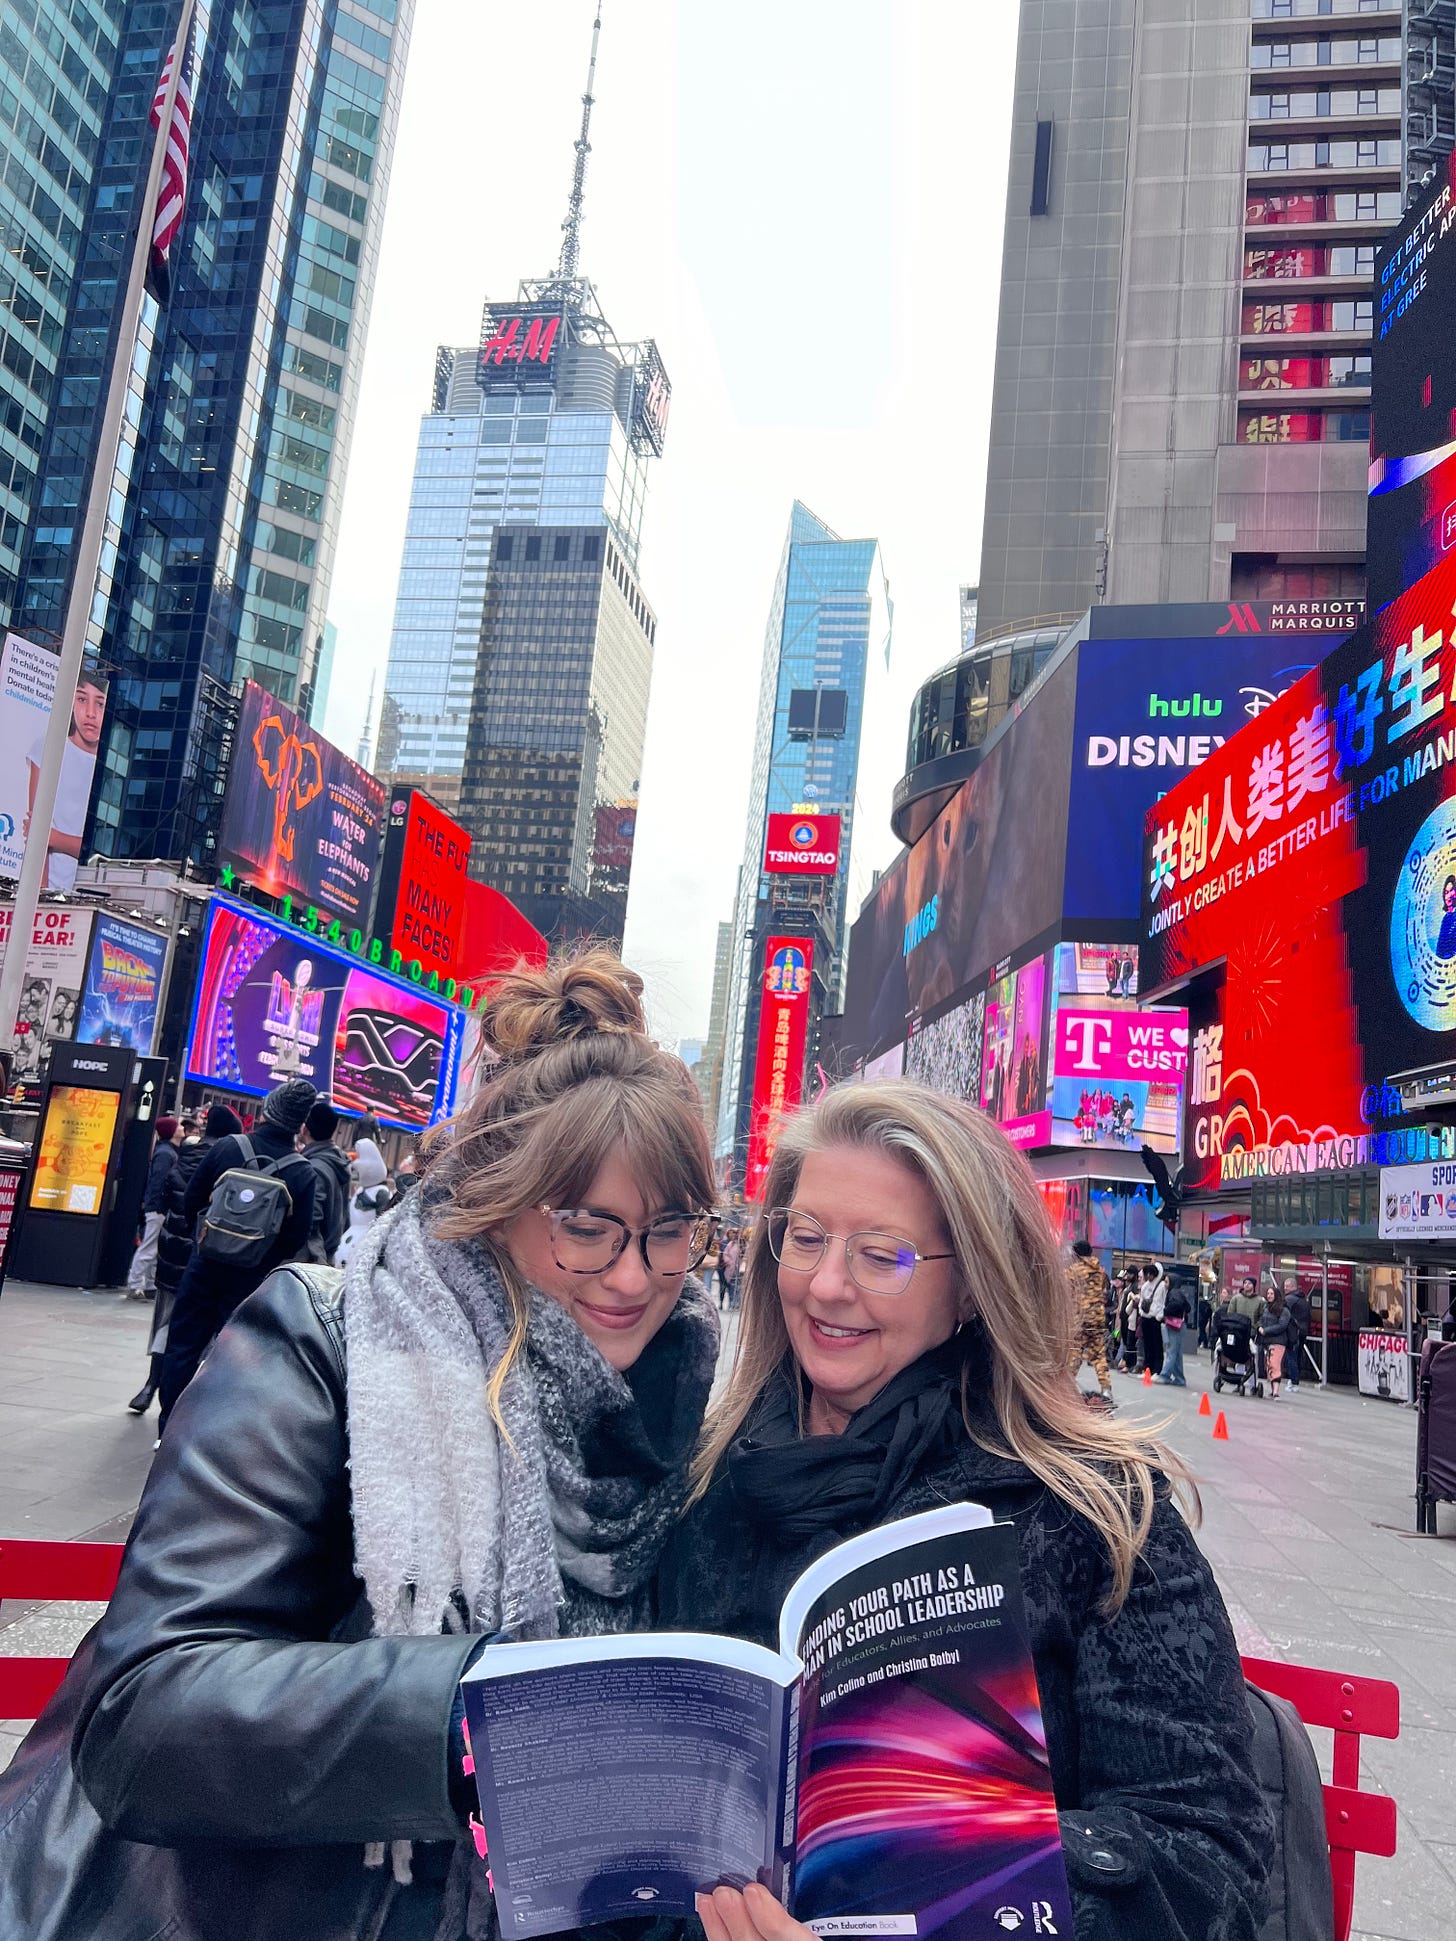 The author and her daughter seated on red folding chairs reading the book, Finding Your Path as a Woman in School Leaderhsip. They are seated in the vibrant setting of Times Square in New York City.